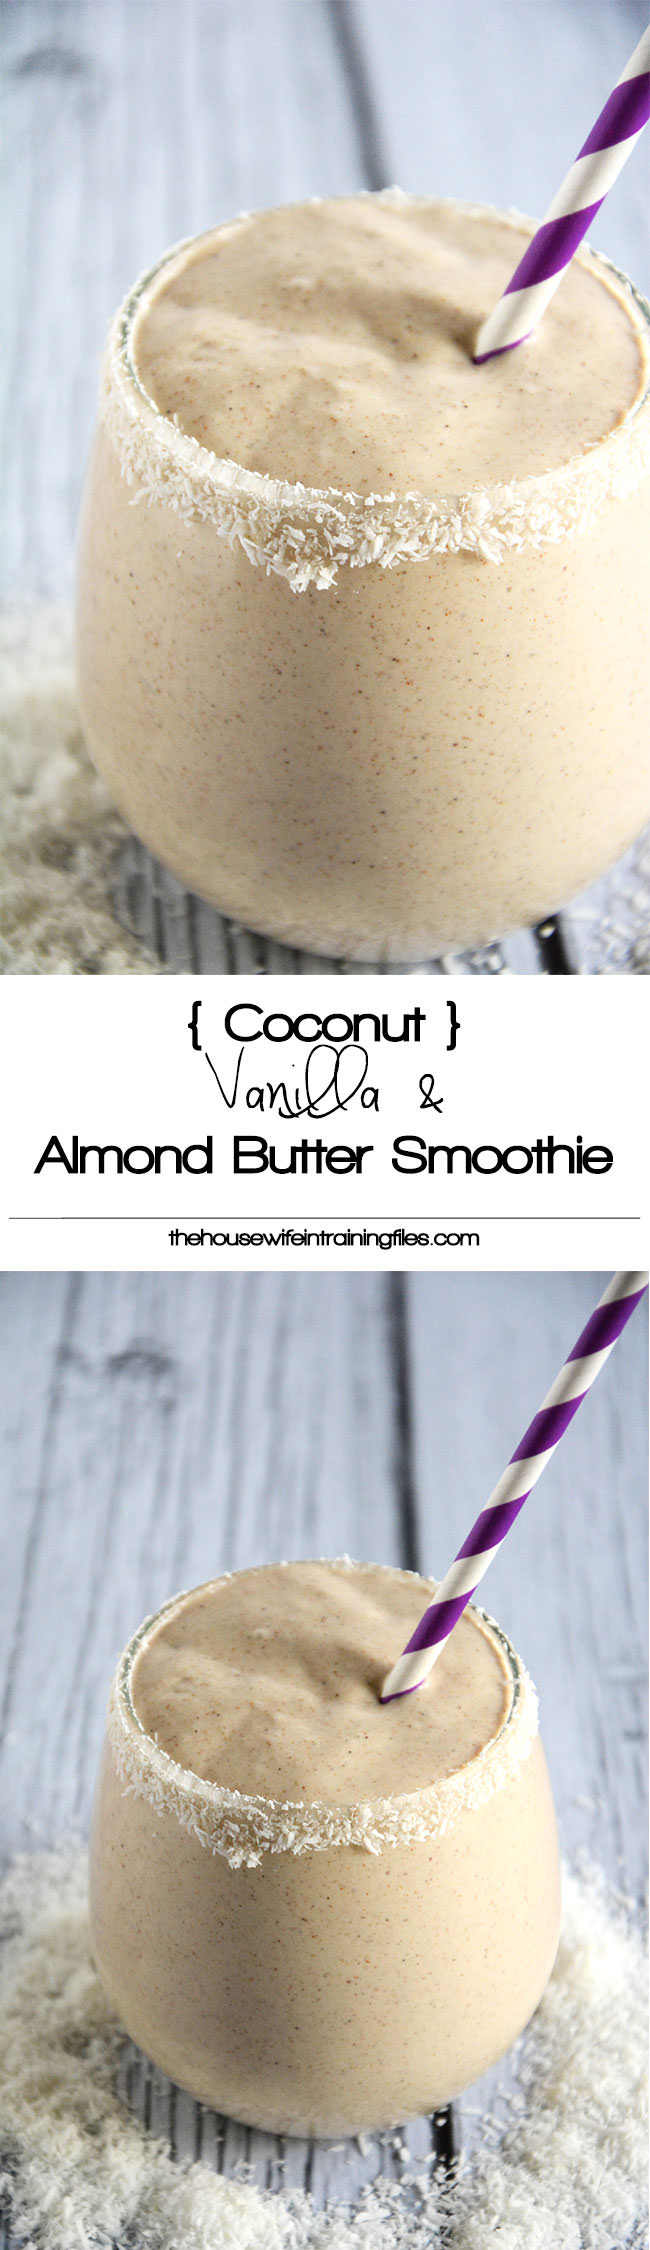 Coconut, Vanilla & Almond Butter Smoothie is a velvety smoothie made with coconut milk, vanilla, almond butter and sweetened with dates! #vegan #paleo #glutenfree #healthy